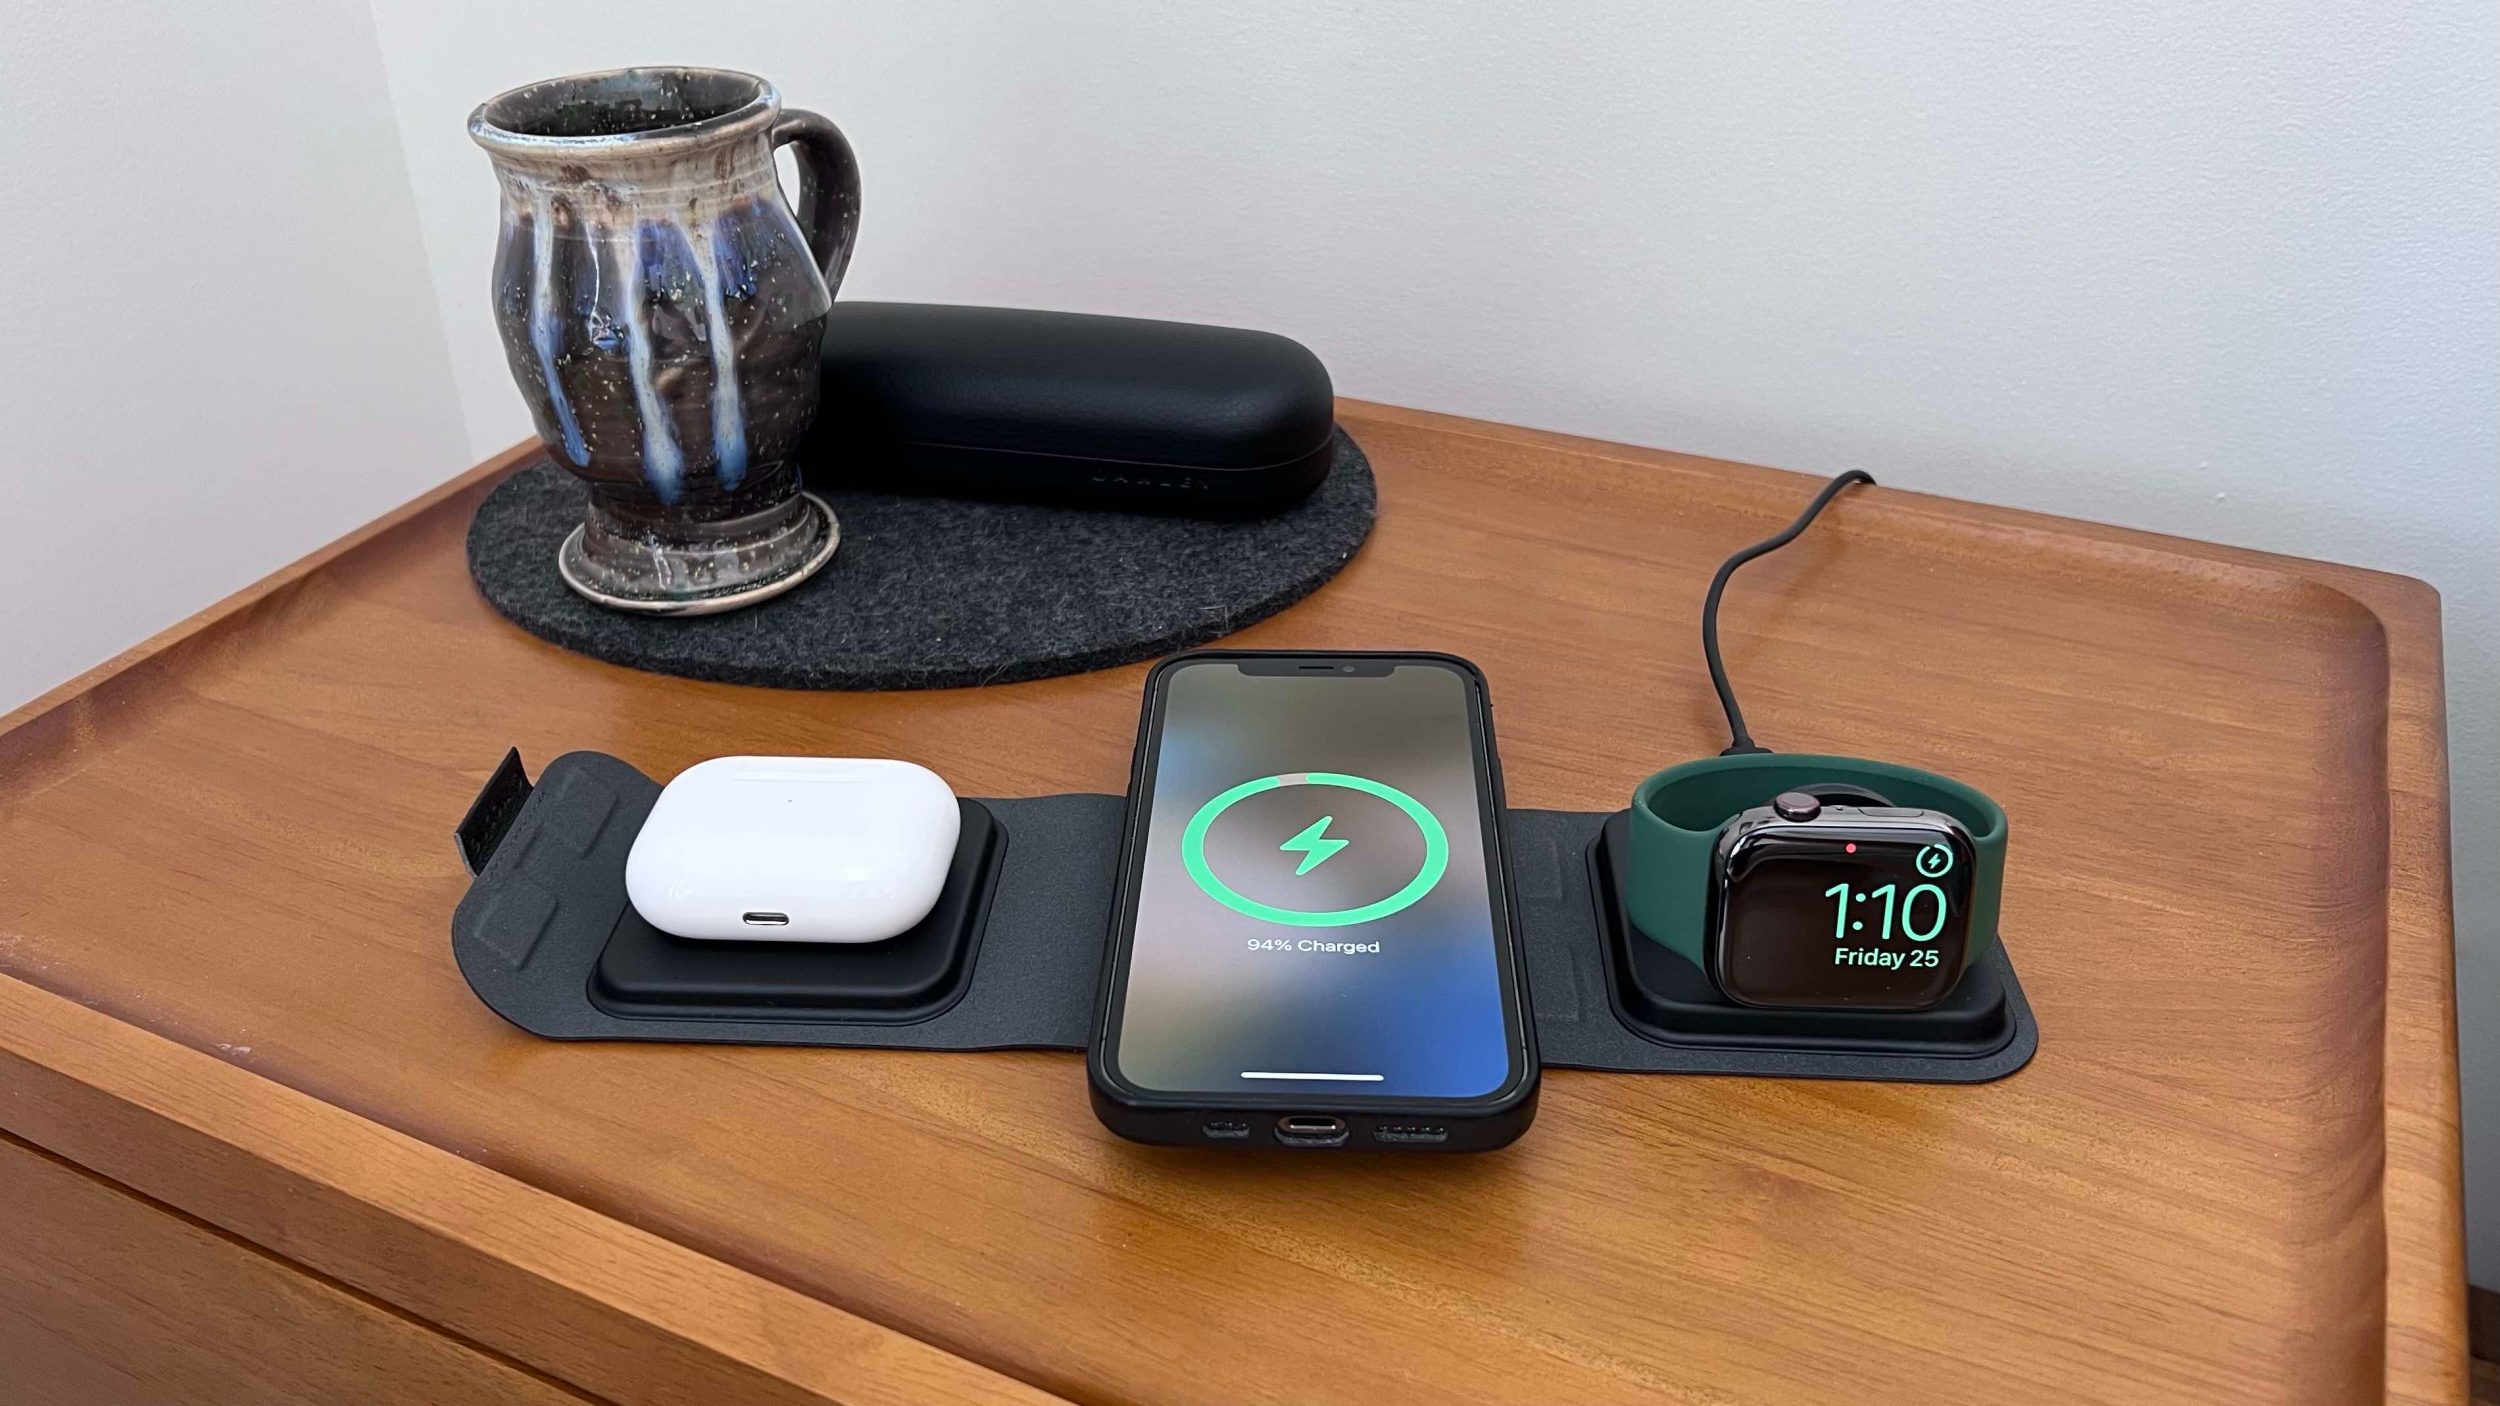 https://9to5toys.com/wp-content/uploads/sites/5/2022/06/iphone-airpods-travel-charger-mophie-3-in-1-review-3.jpg